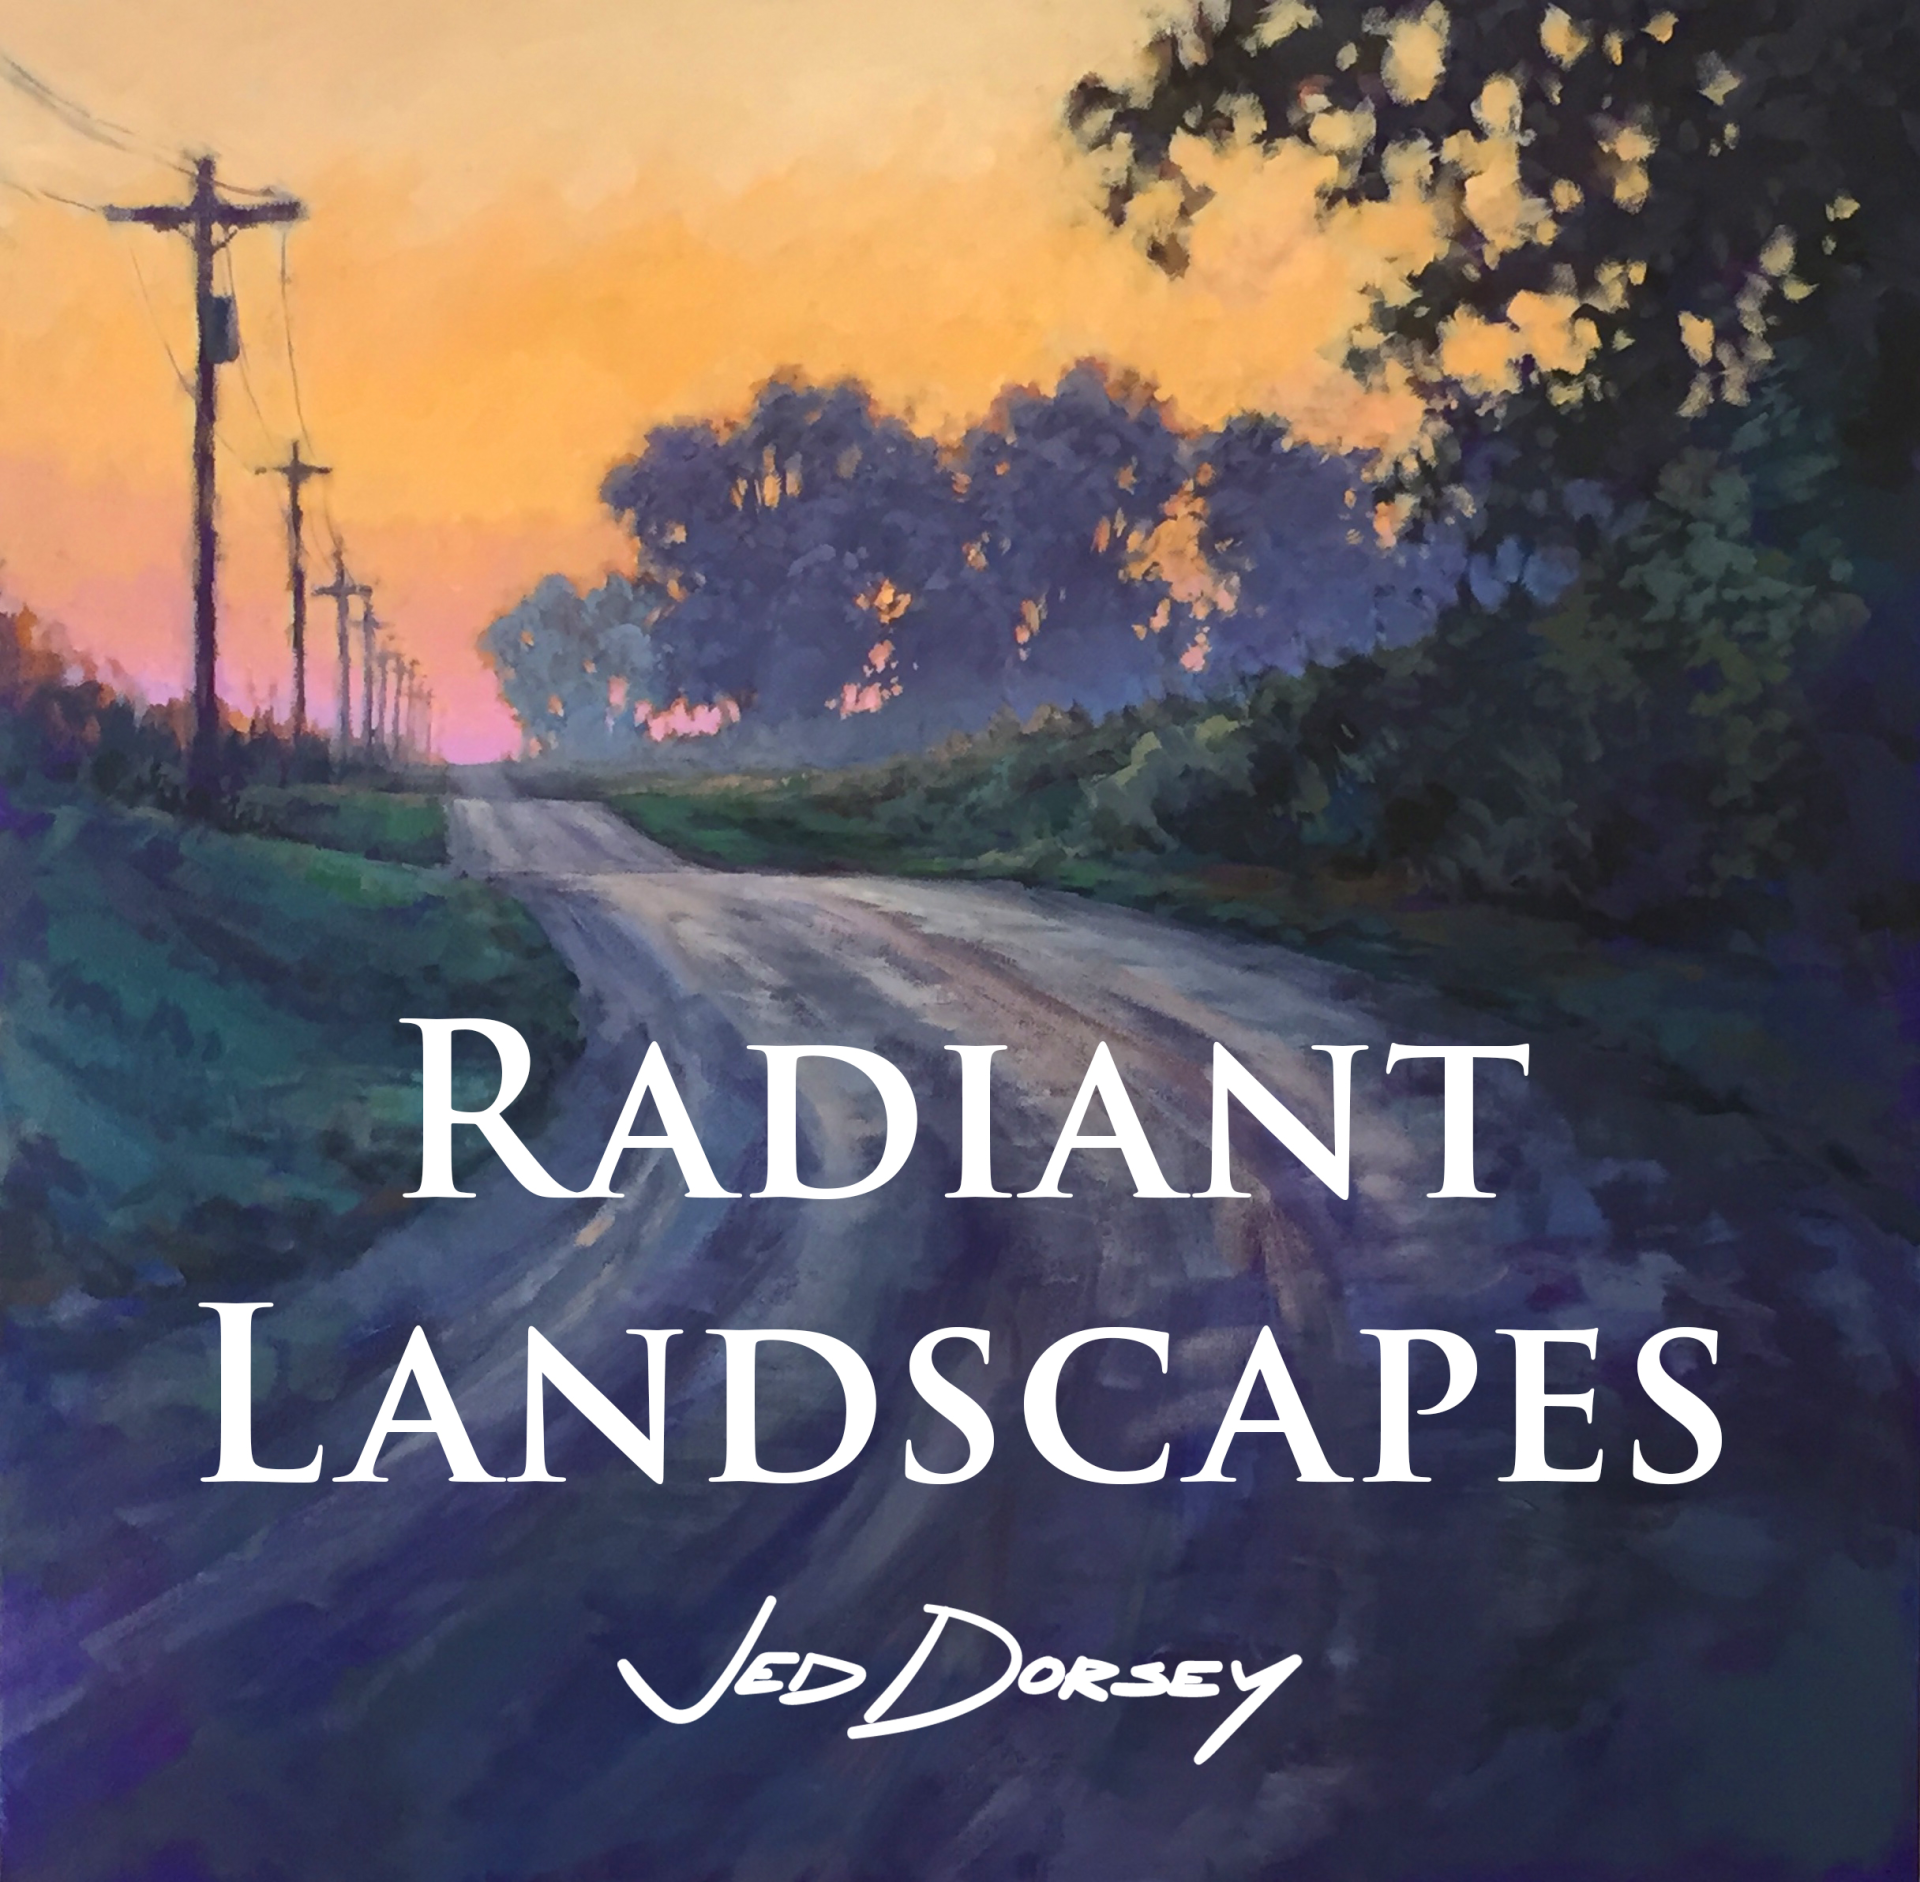 acrylic painting of radiant landscape by jed dorsey